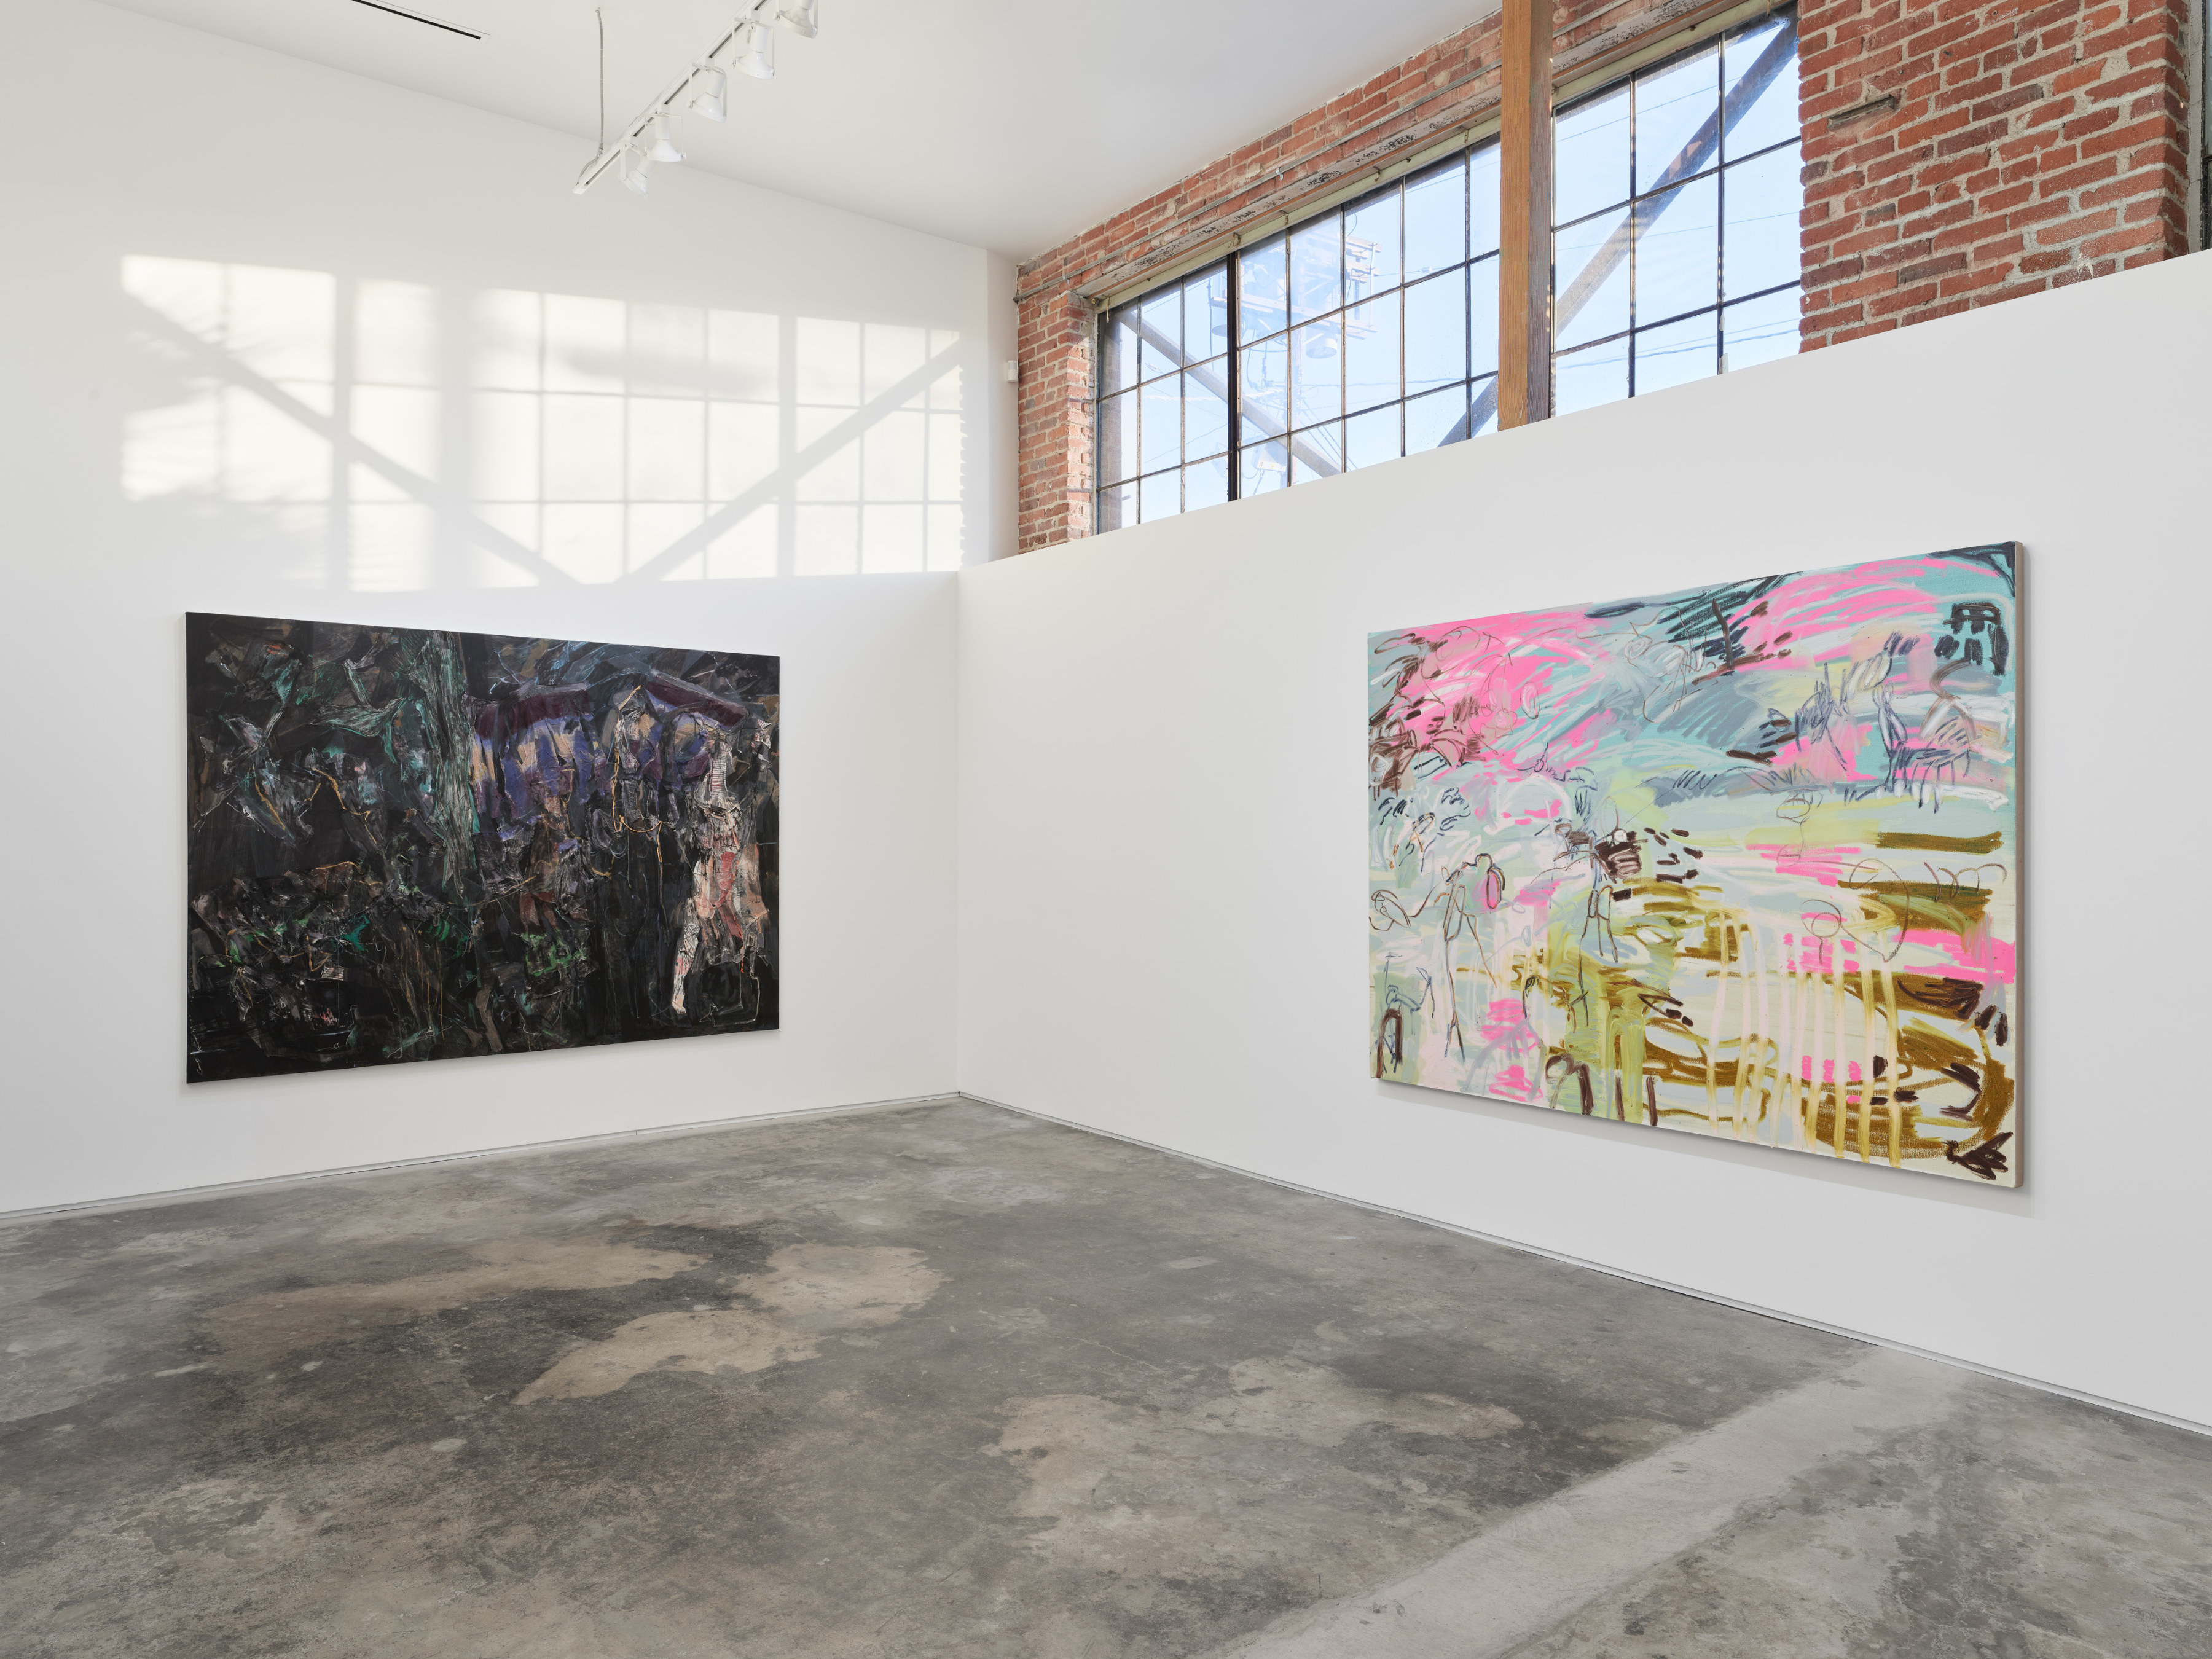 Installation view of the exhibition "The Big Picture" at Night Gallery, including a large scale painting by Iva Gueorguieva and Janaina Tschäpe